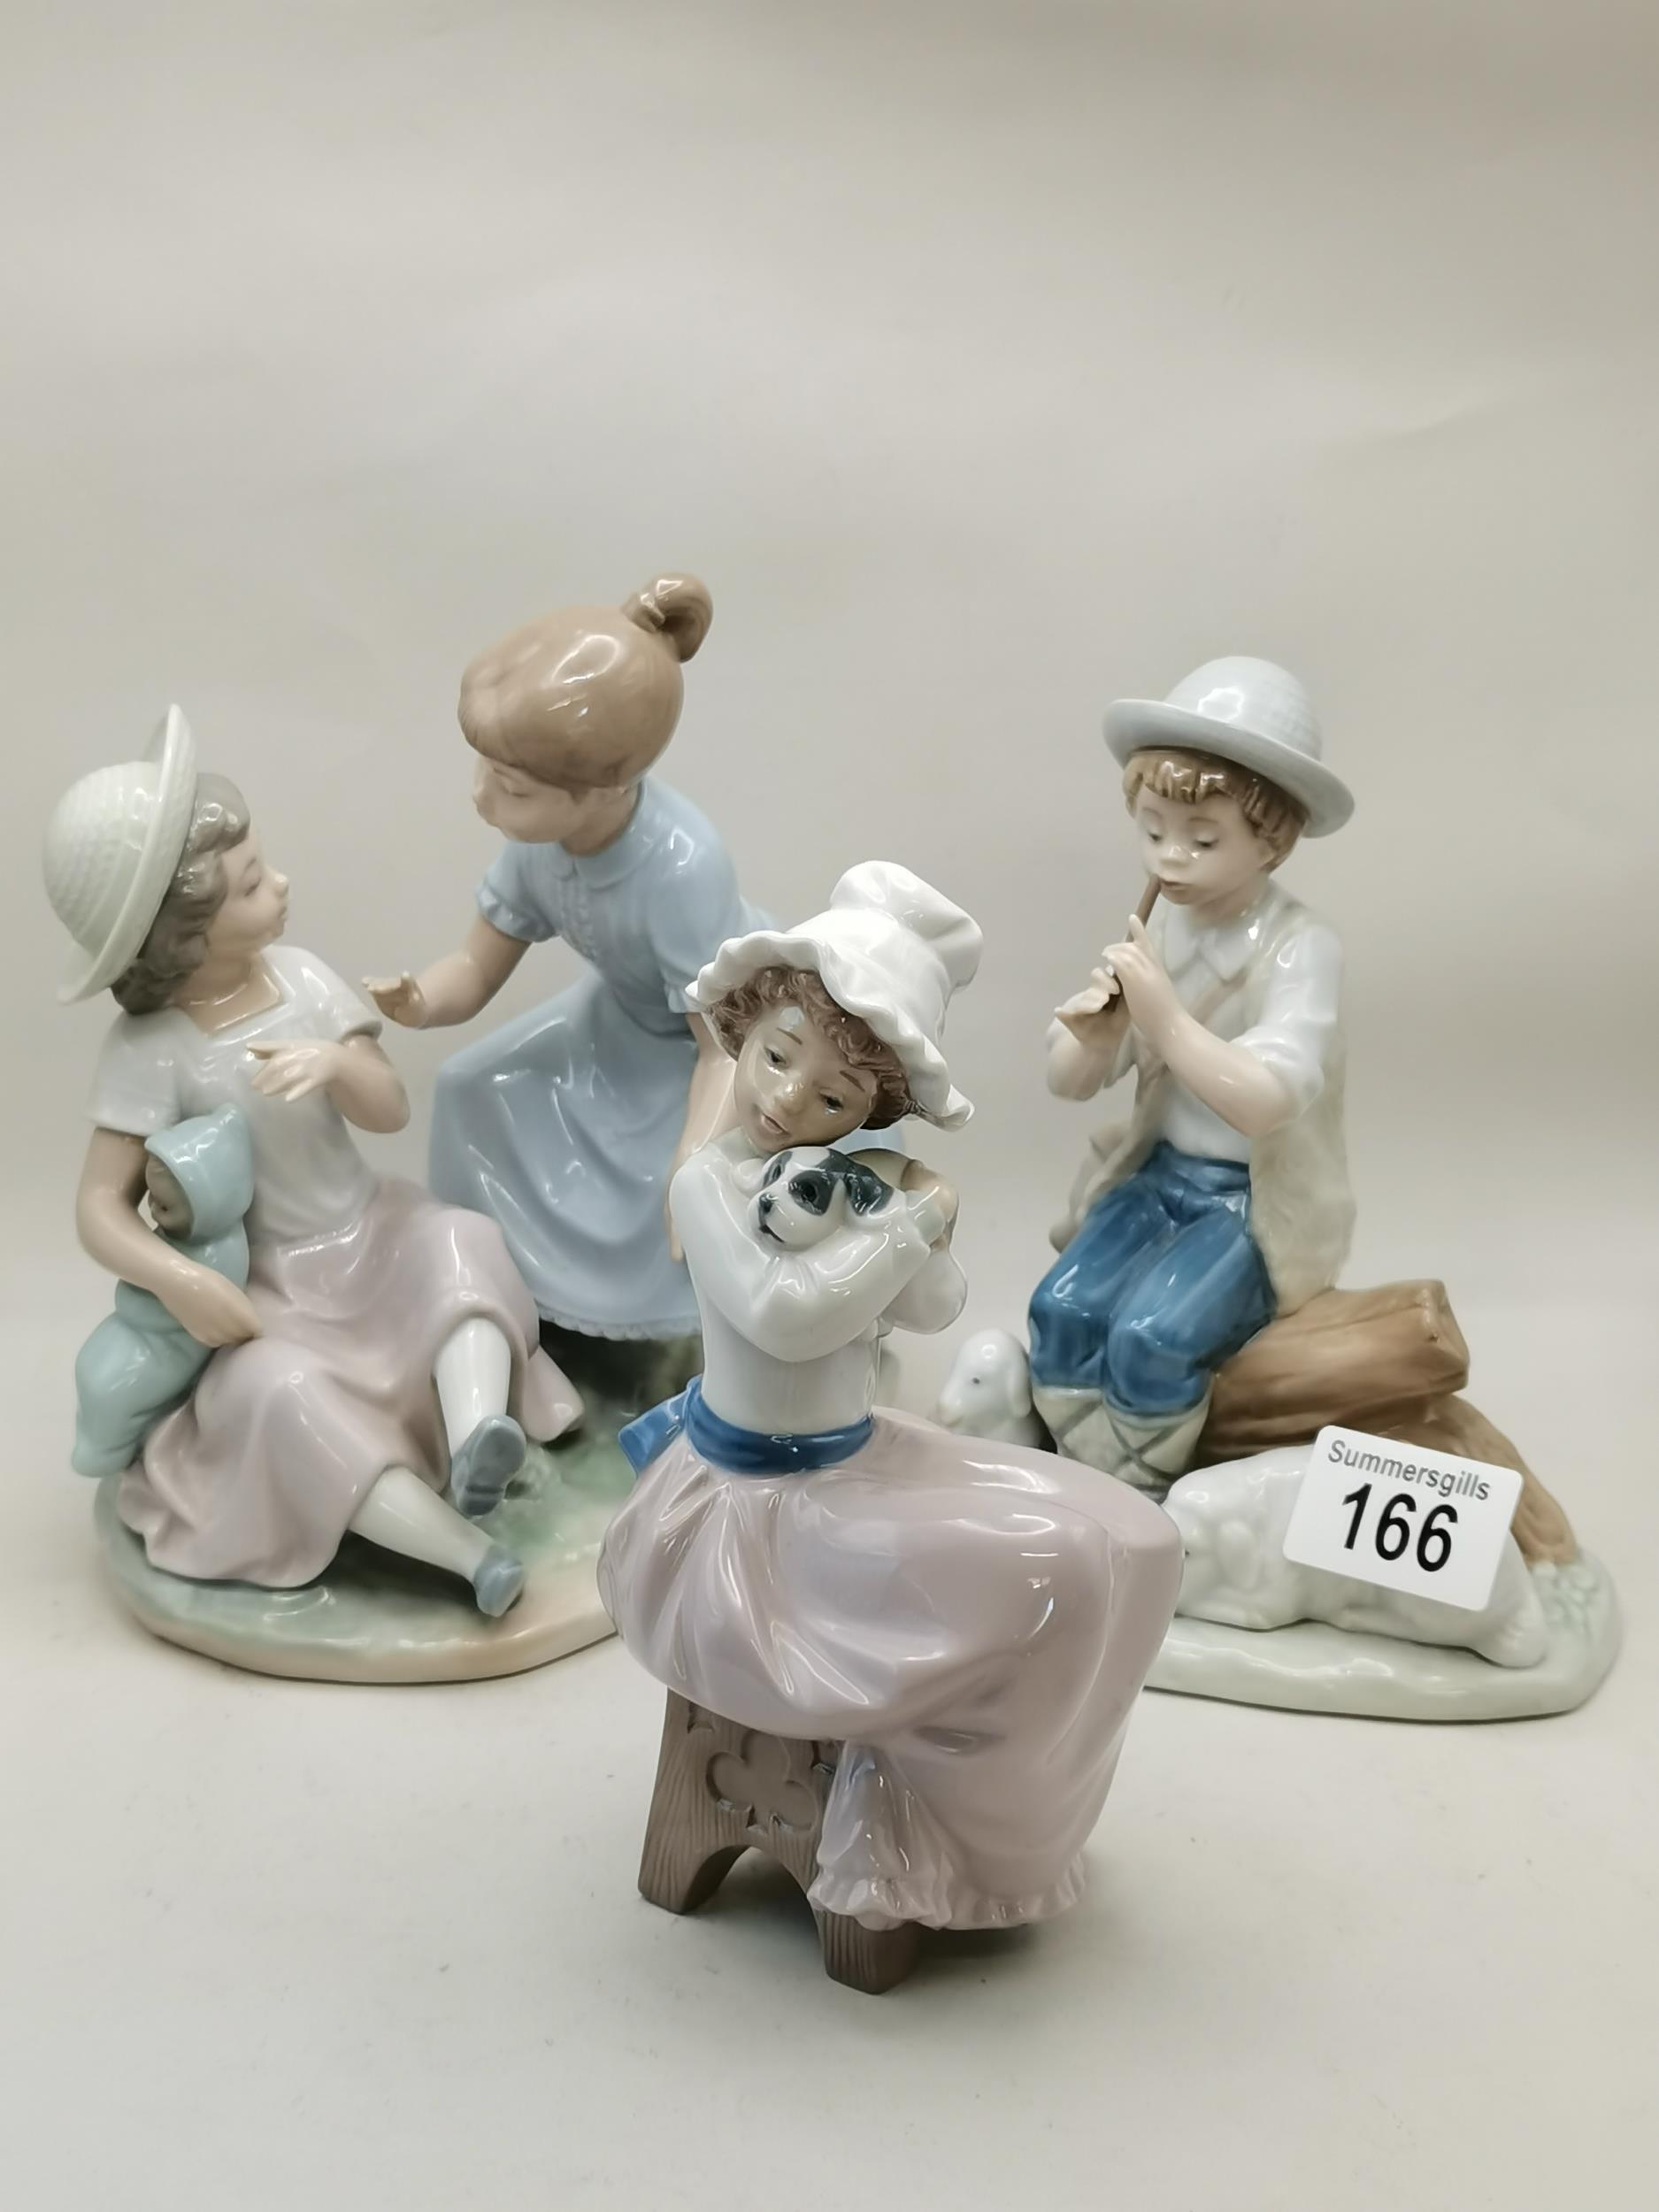 X3 Nao figurines - Boy Playing Flute, a Big Hug and girls playing with Doll